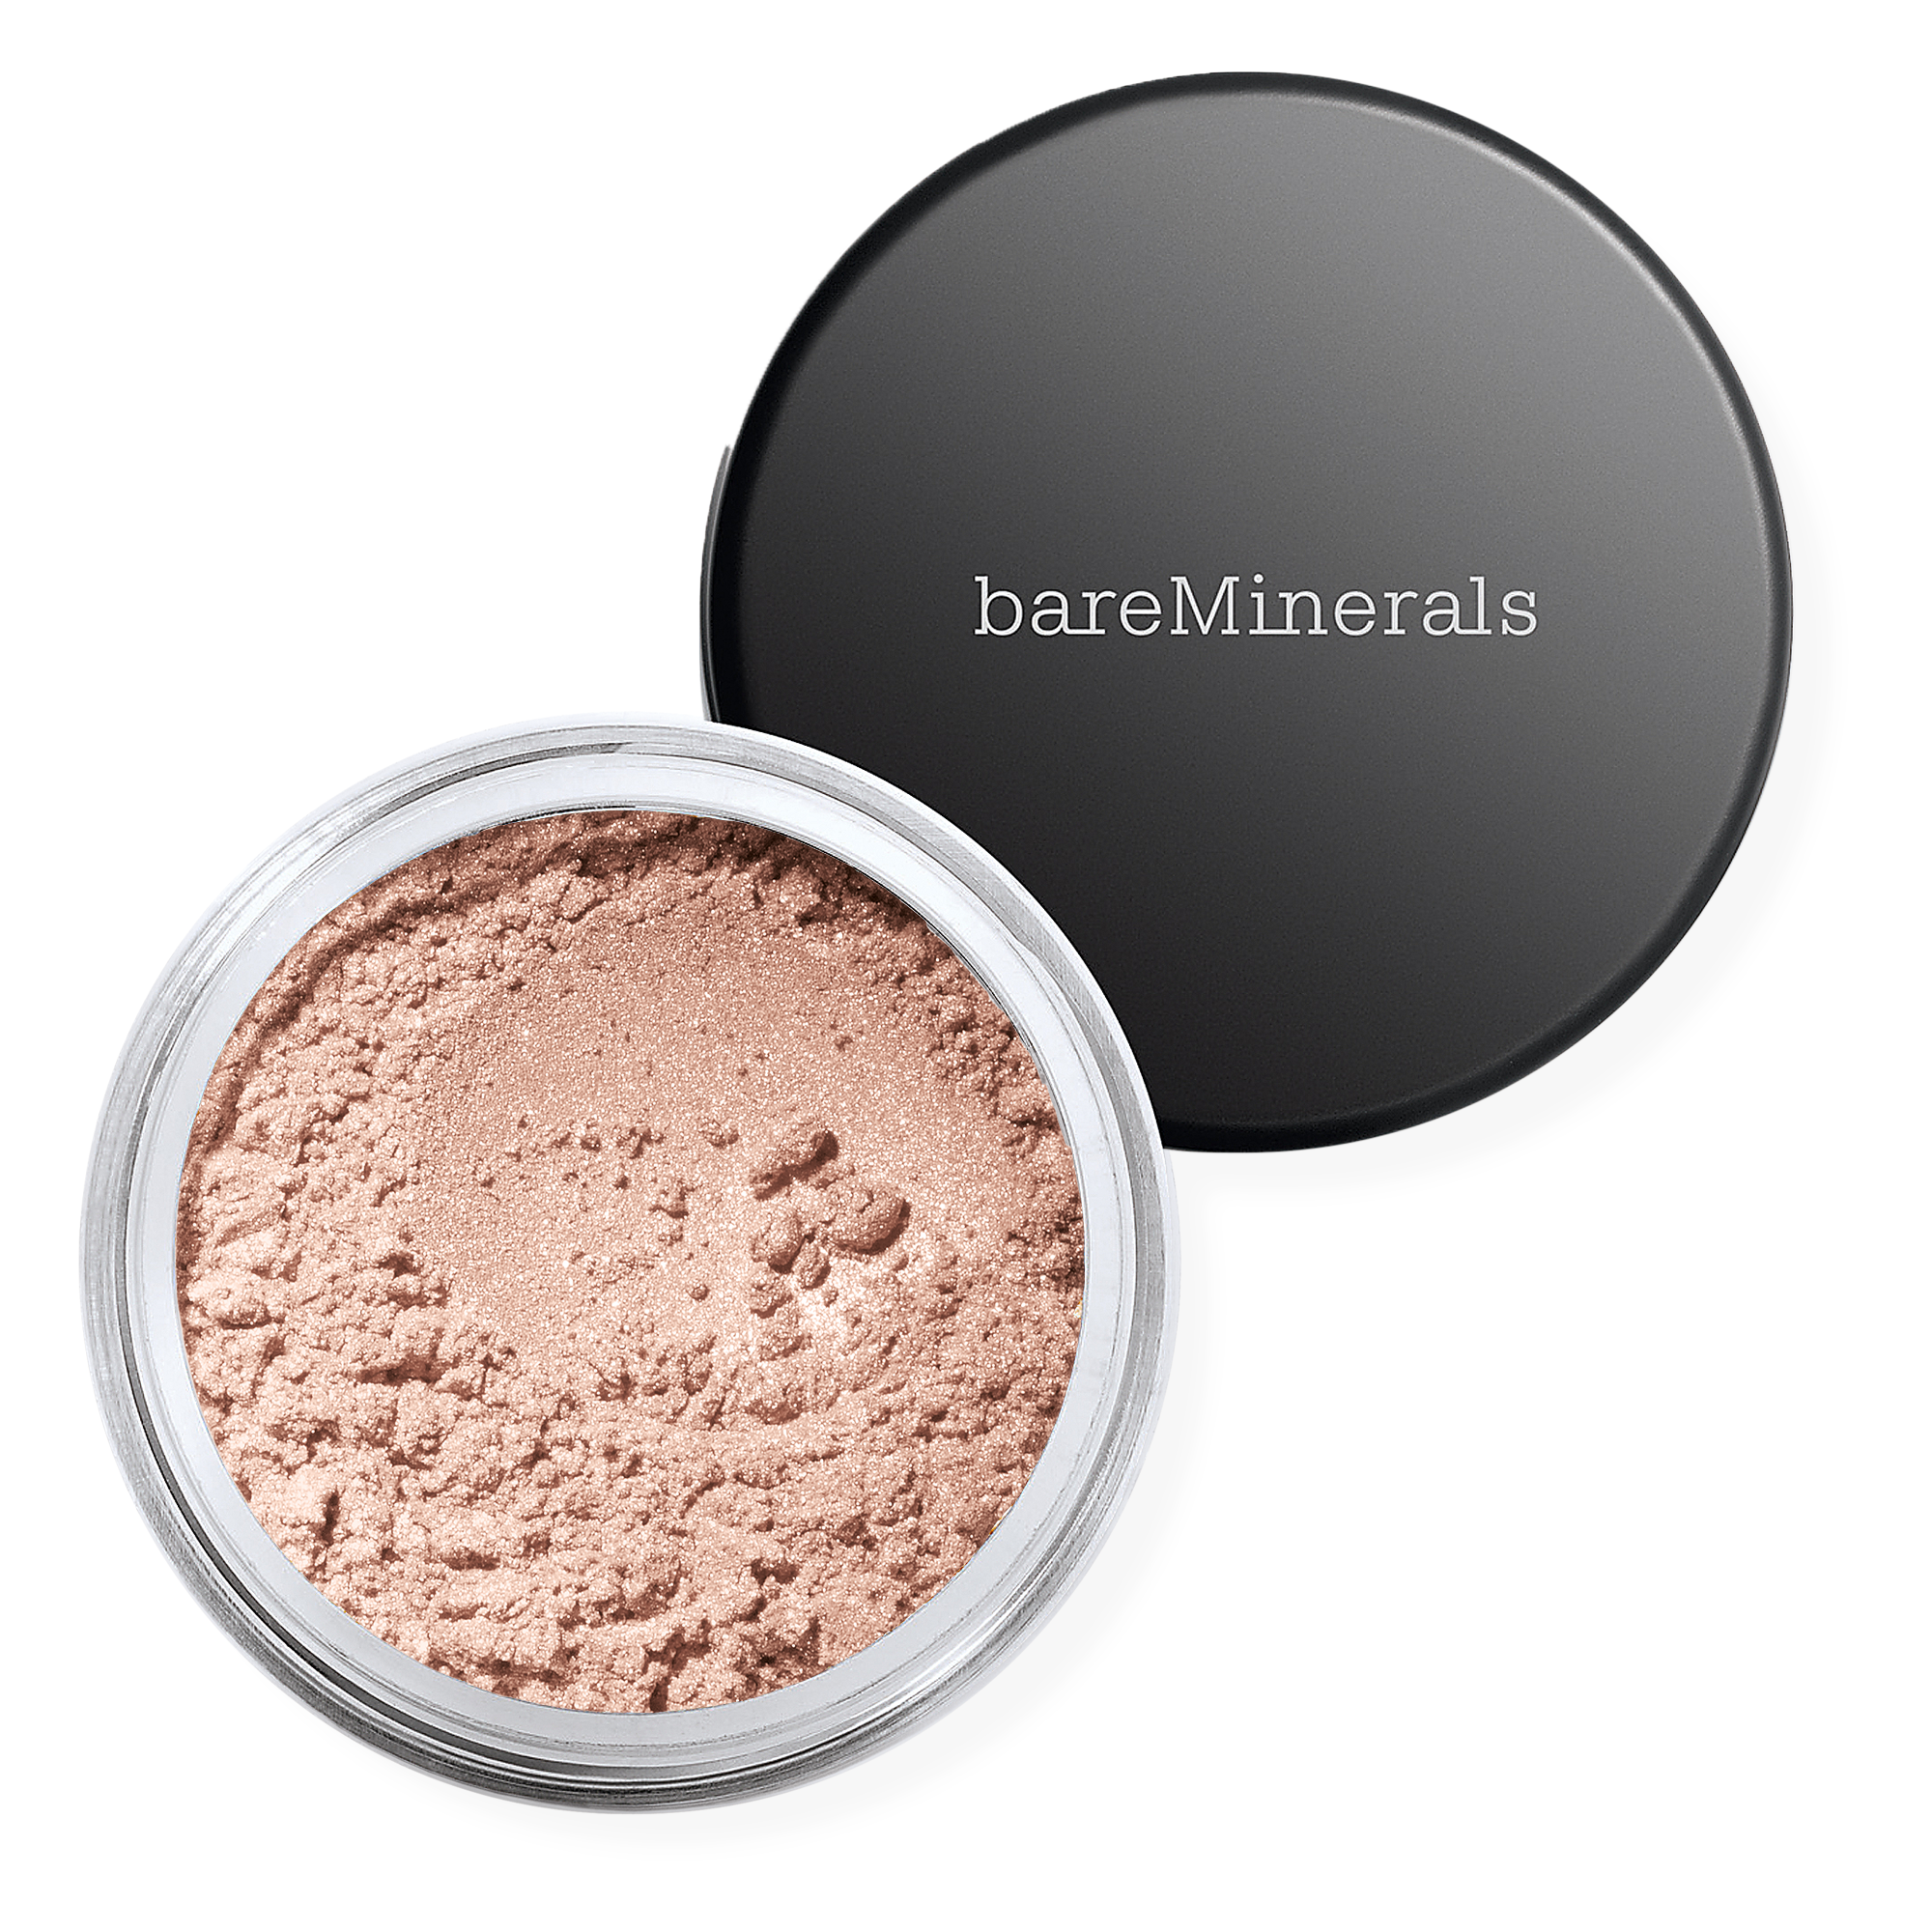 bareMinerals Loose Mineral Eyecolor / CULTURED PEARL